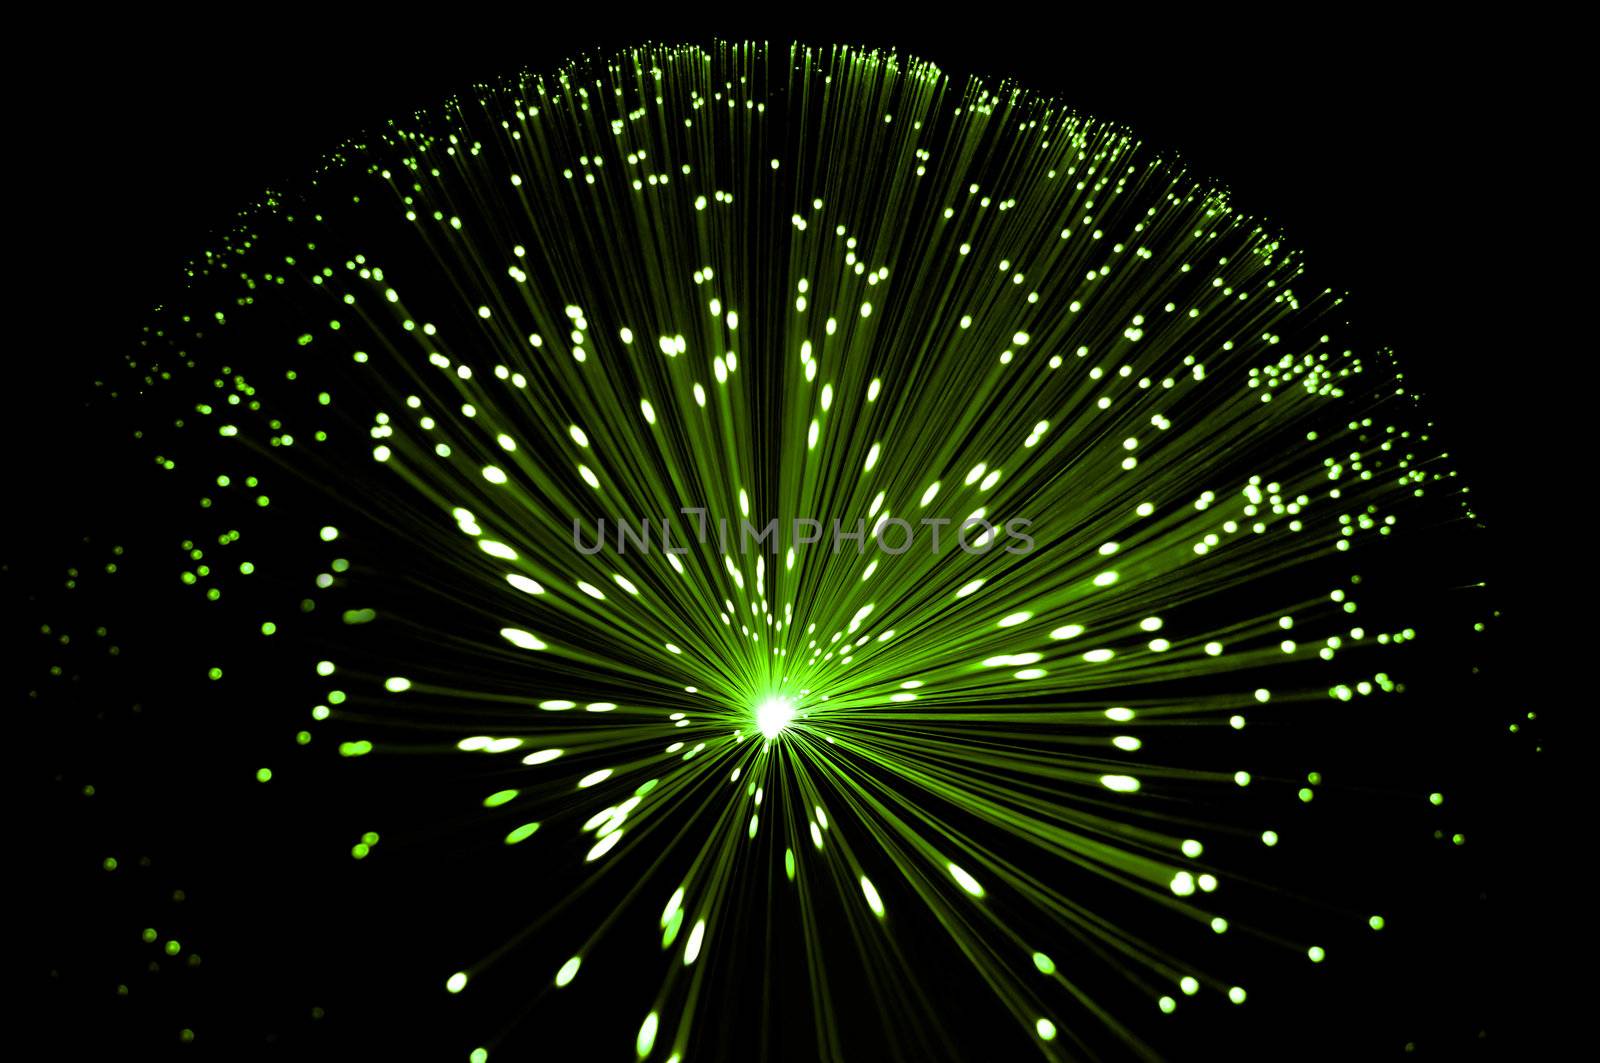 Abstract style overhead view of illuminated fiber optic strands against black.